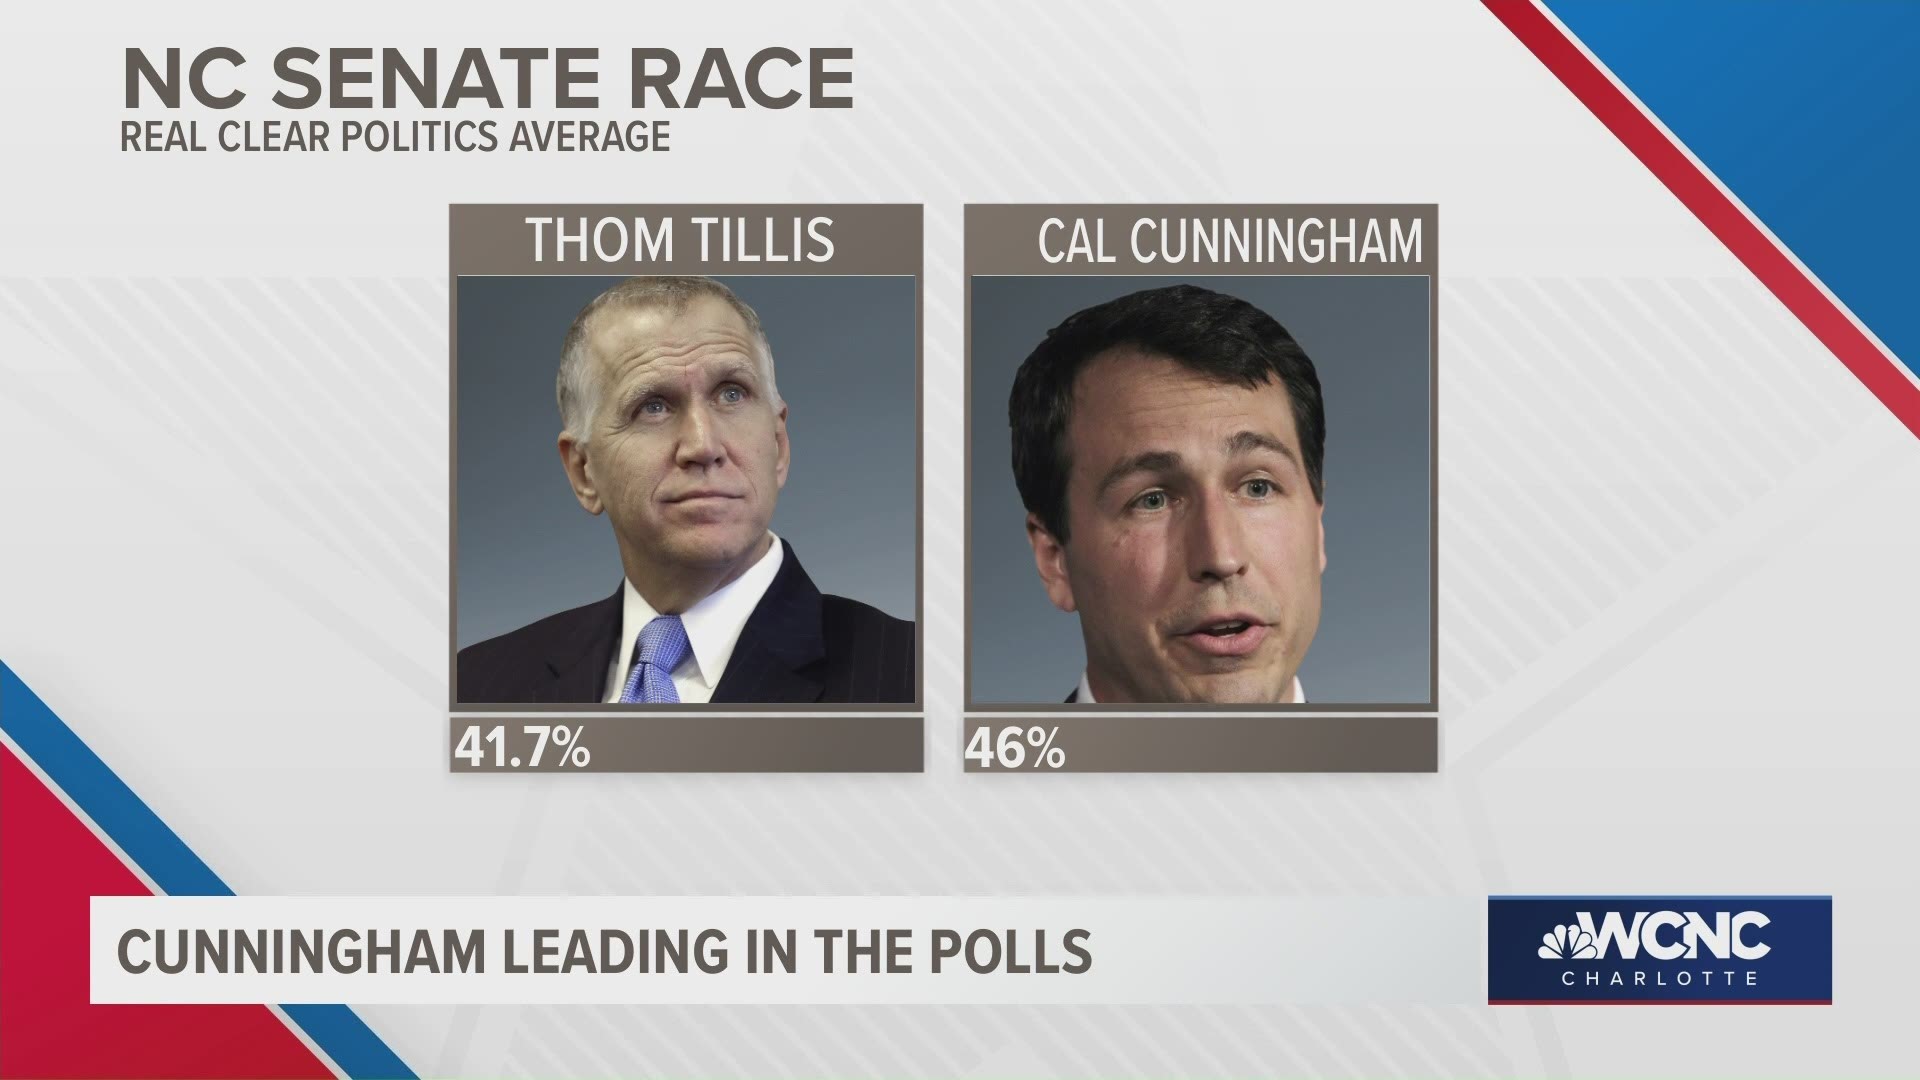 FLashpoint 10/18: Cal Cunningham leads polls in NC despite the recent scandal.